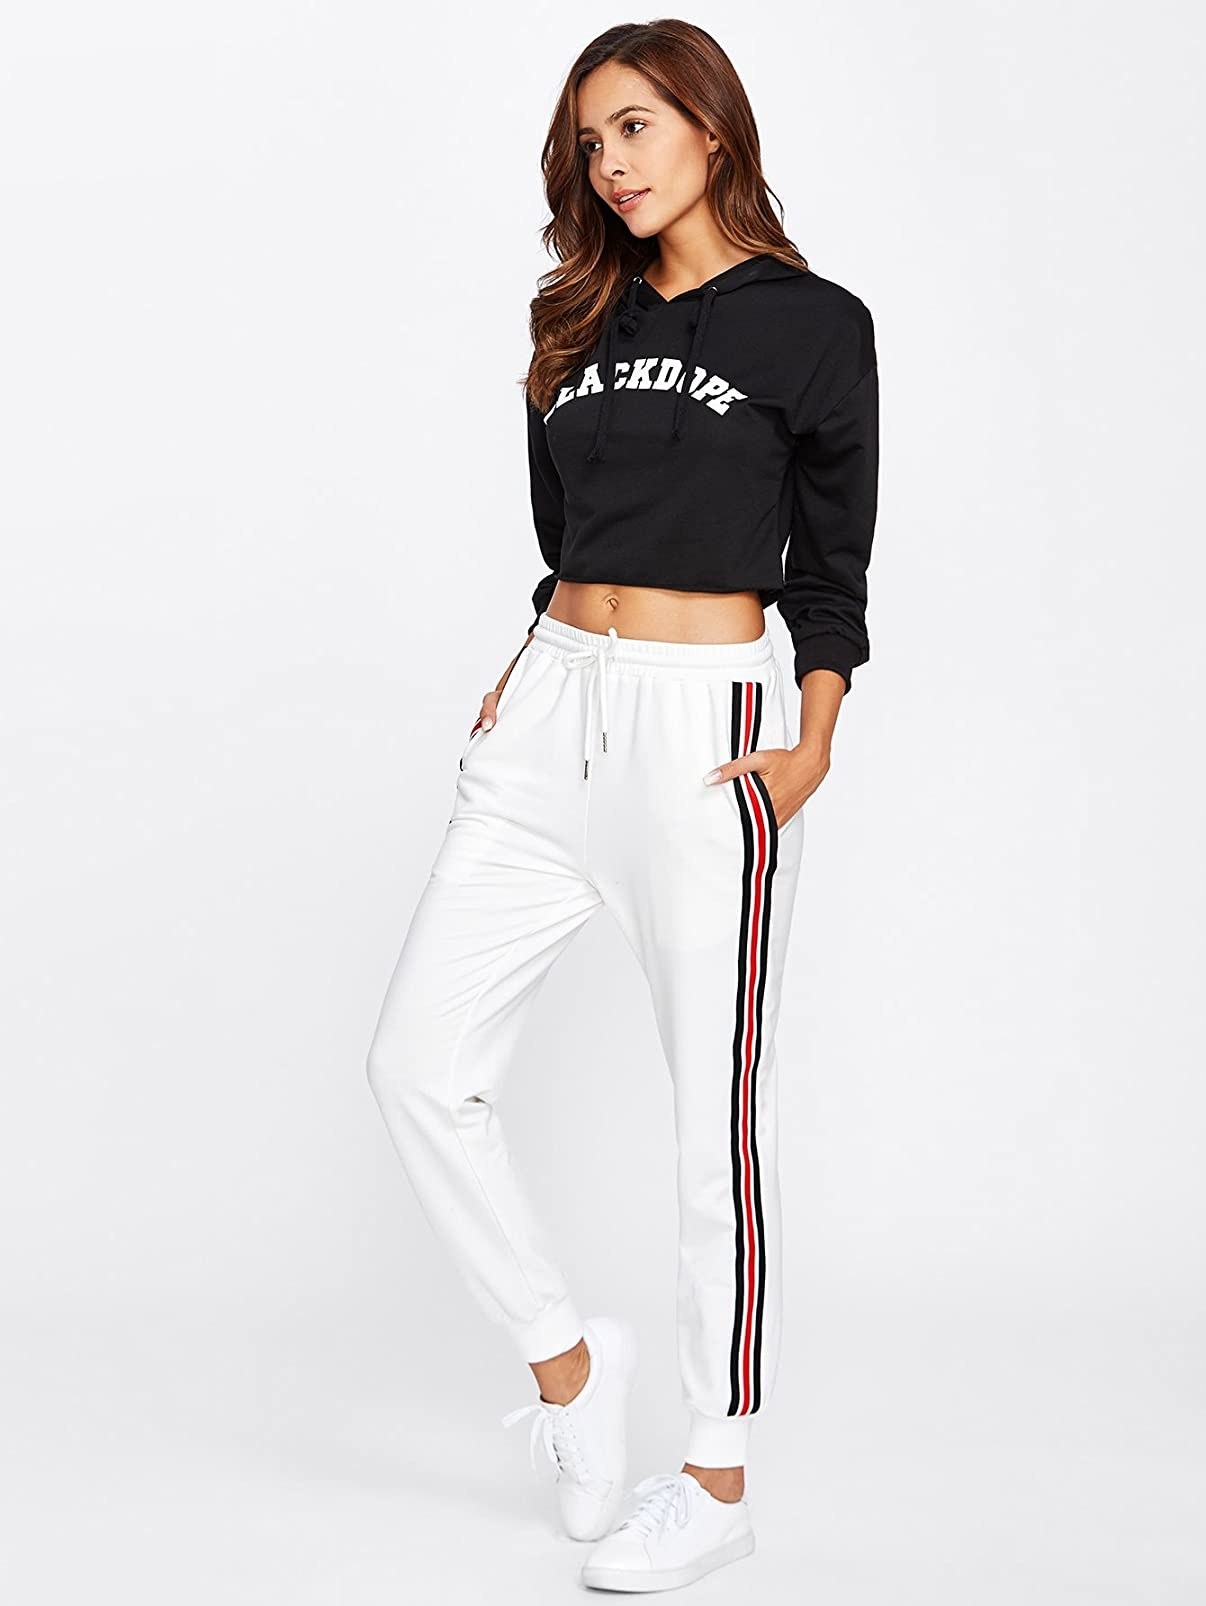 A model wearing the sweatpants in white with red and black side stripes